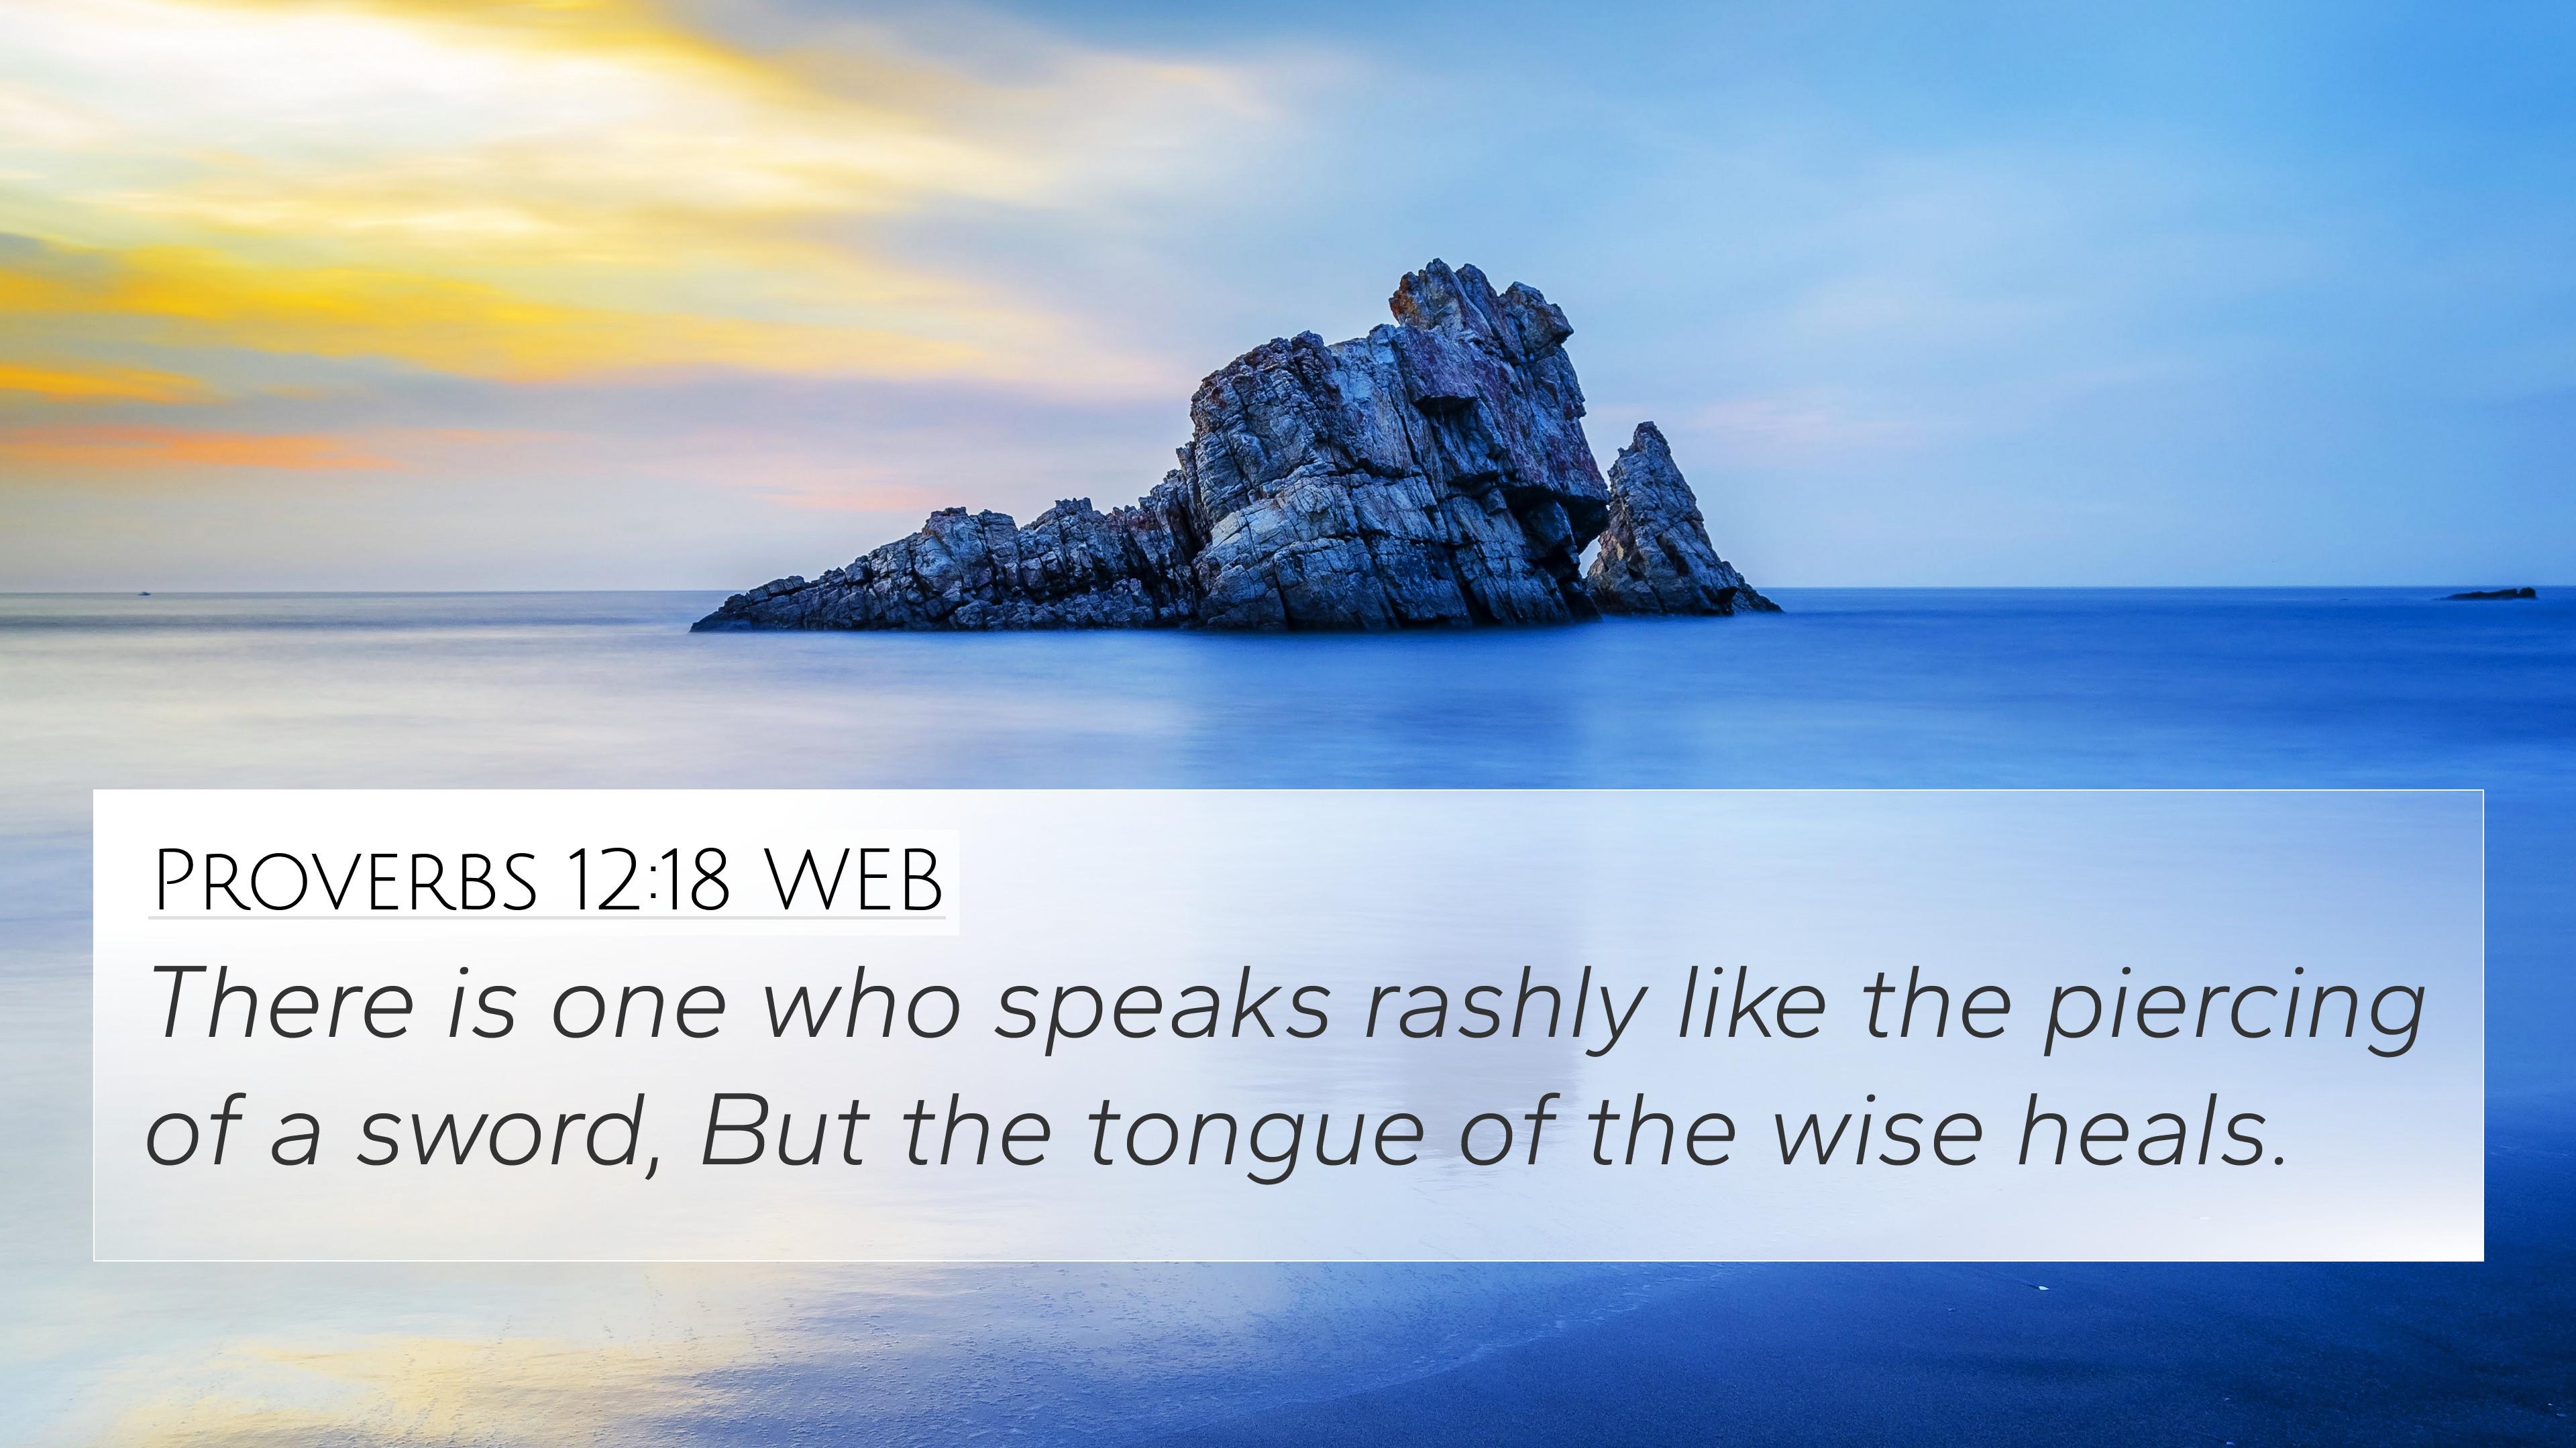 Proverbs Web 4k Wallpaper There Is One Who Speaks Rashly